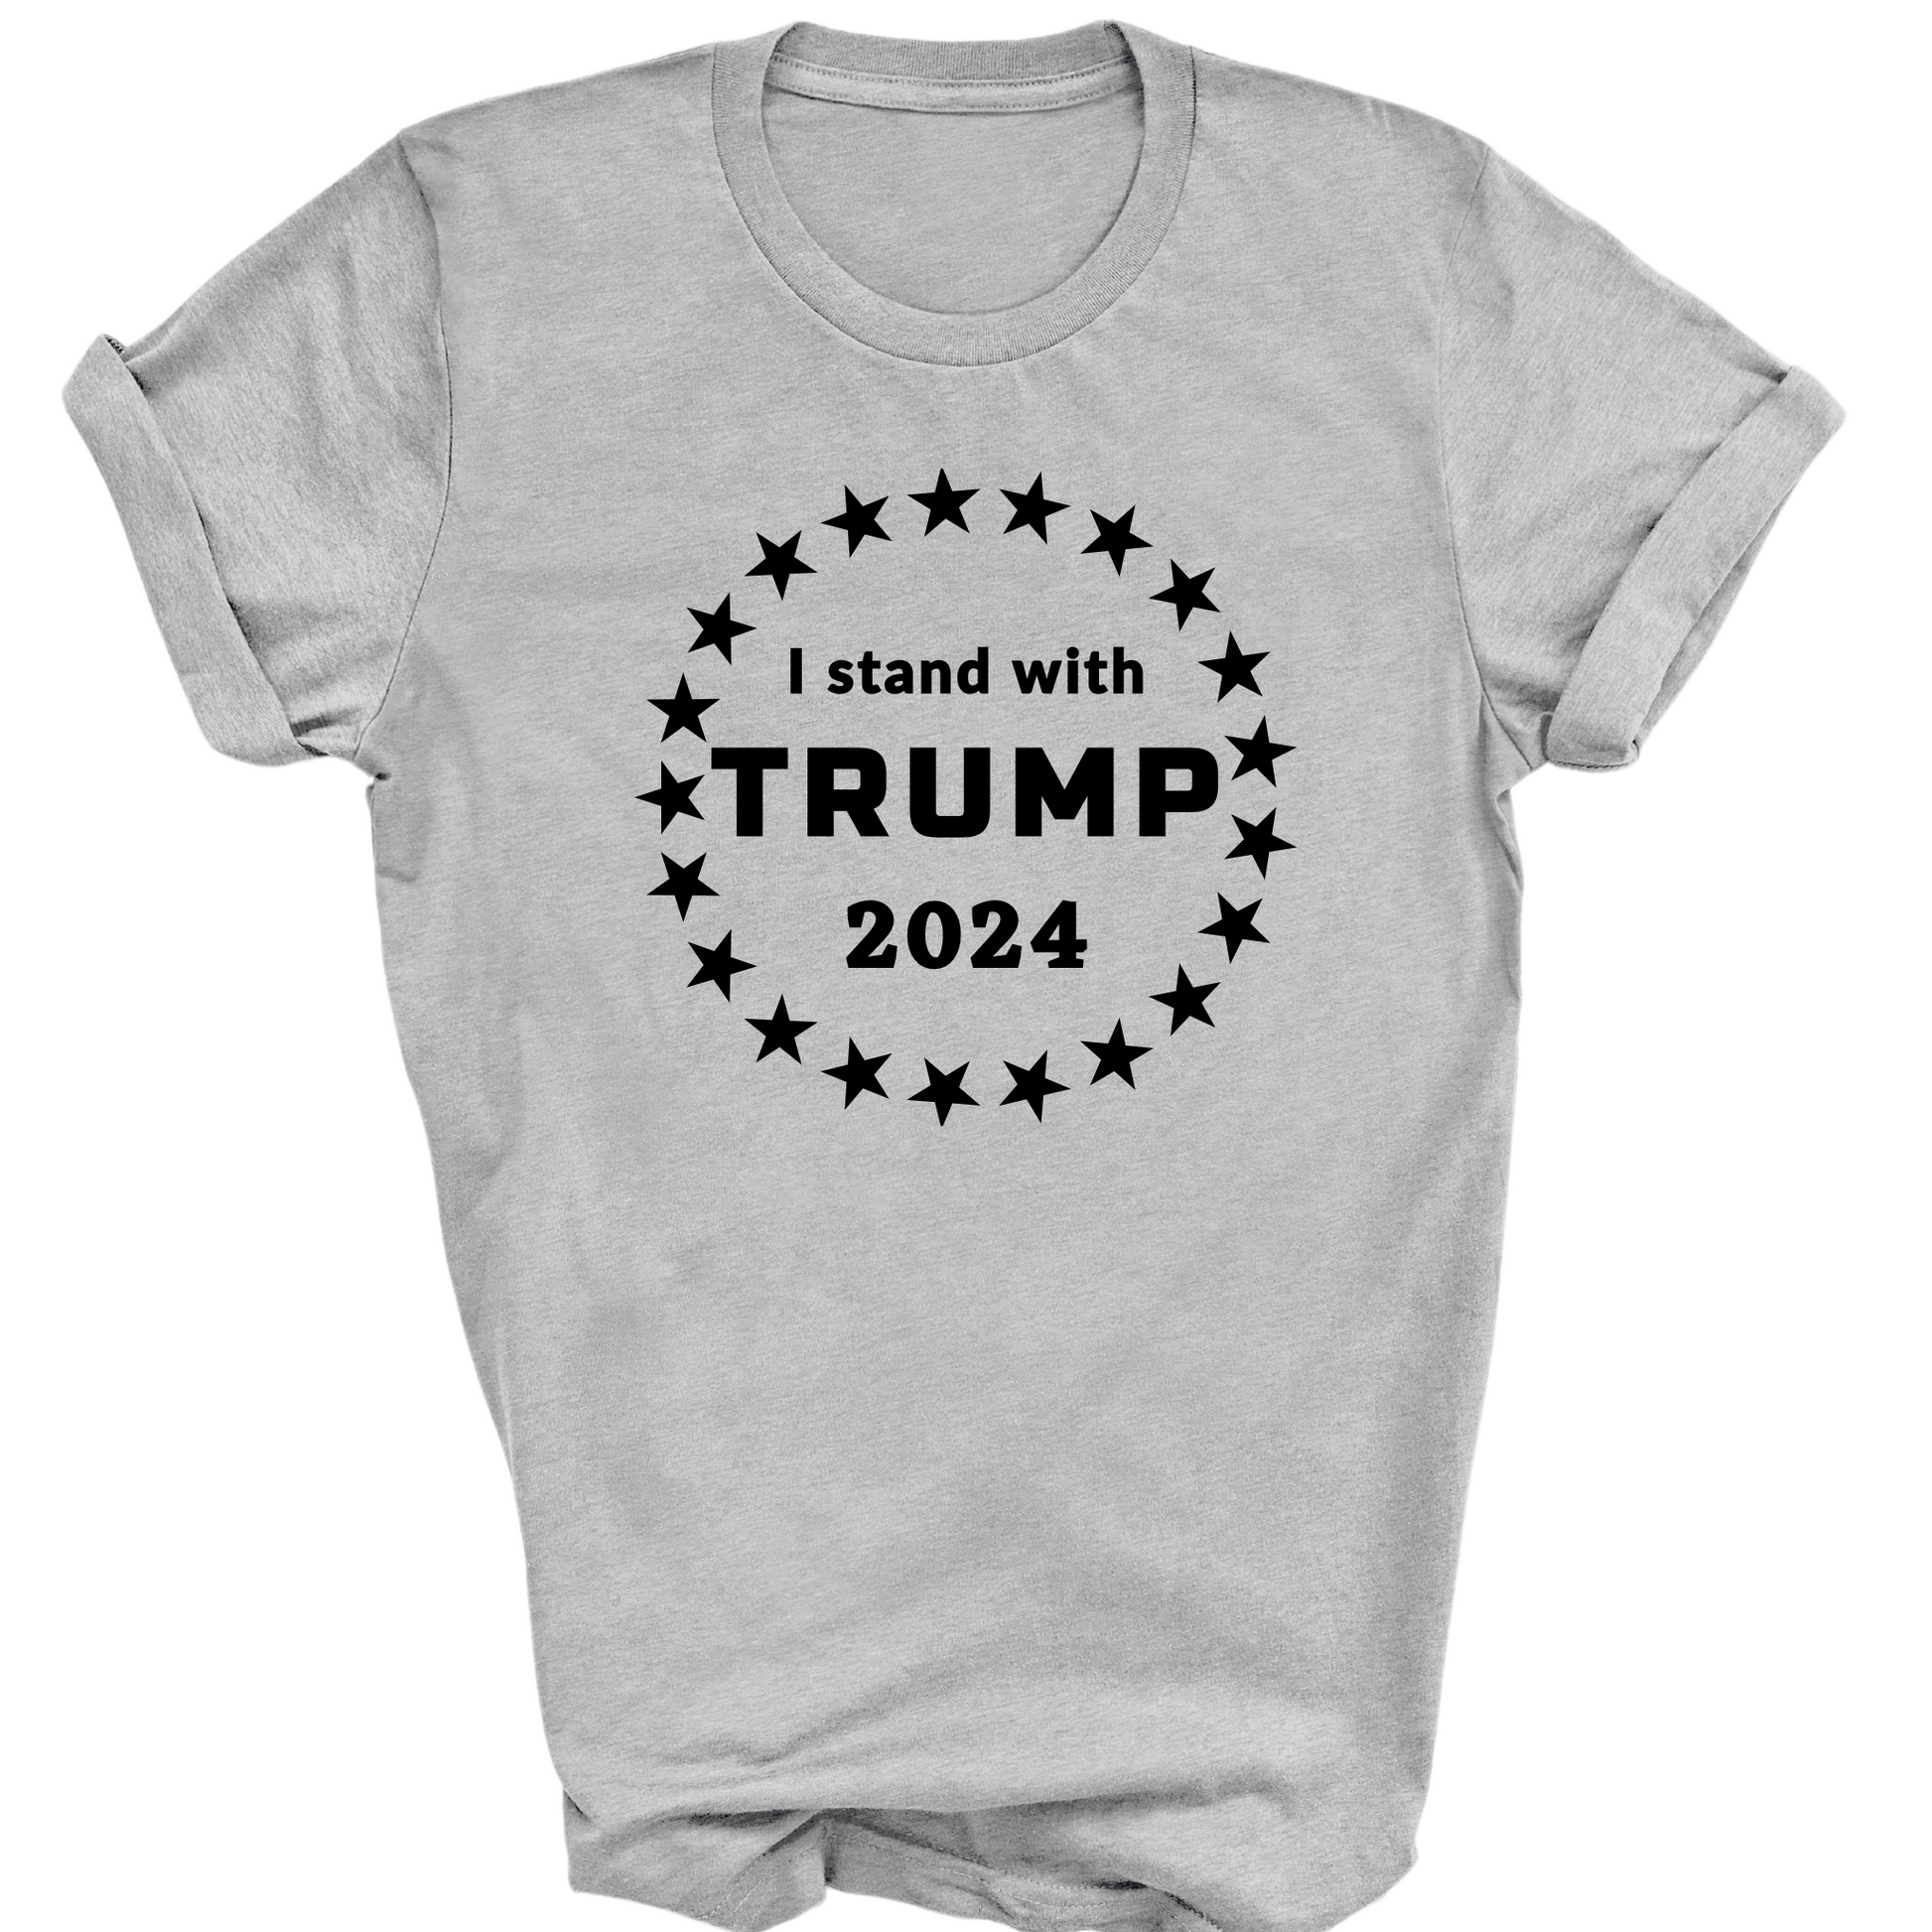 I STAND WITH TRUMP T-SHIRT - The Right Side Prints